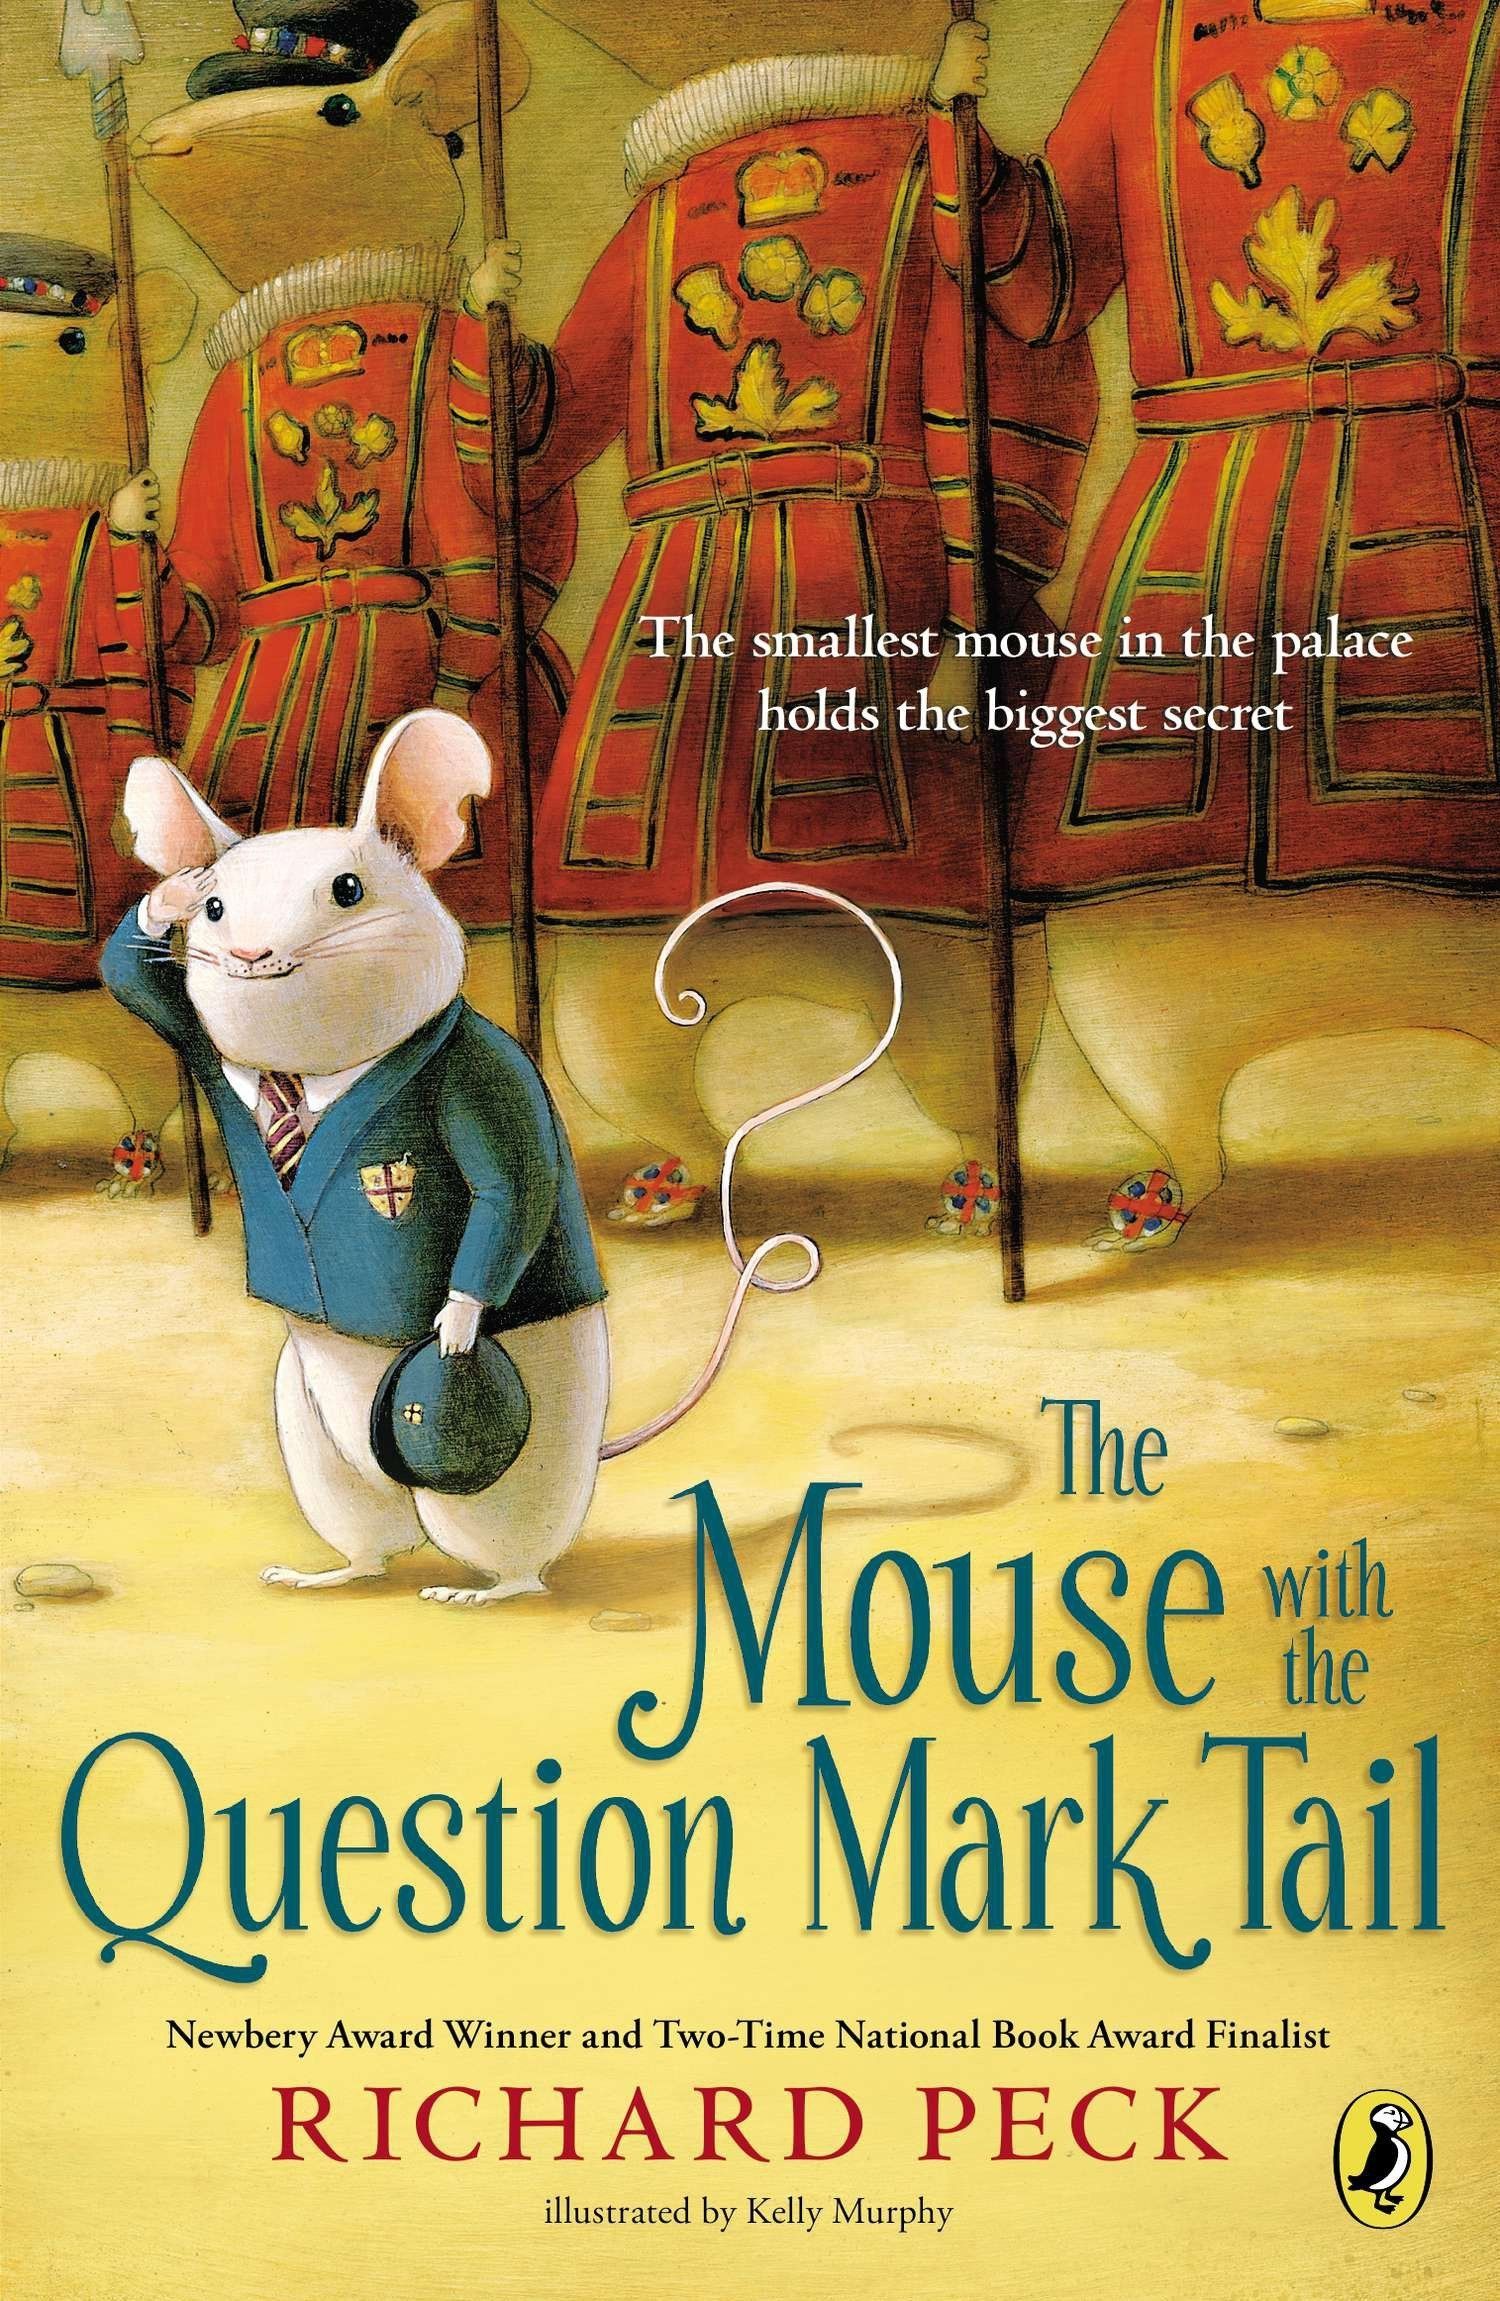 The Mouse with the Question Mark Tail book cover